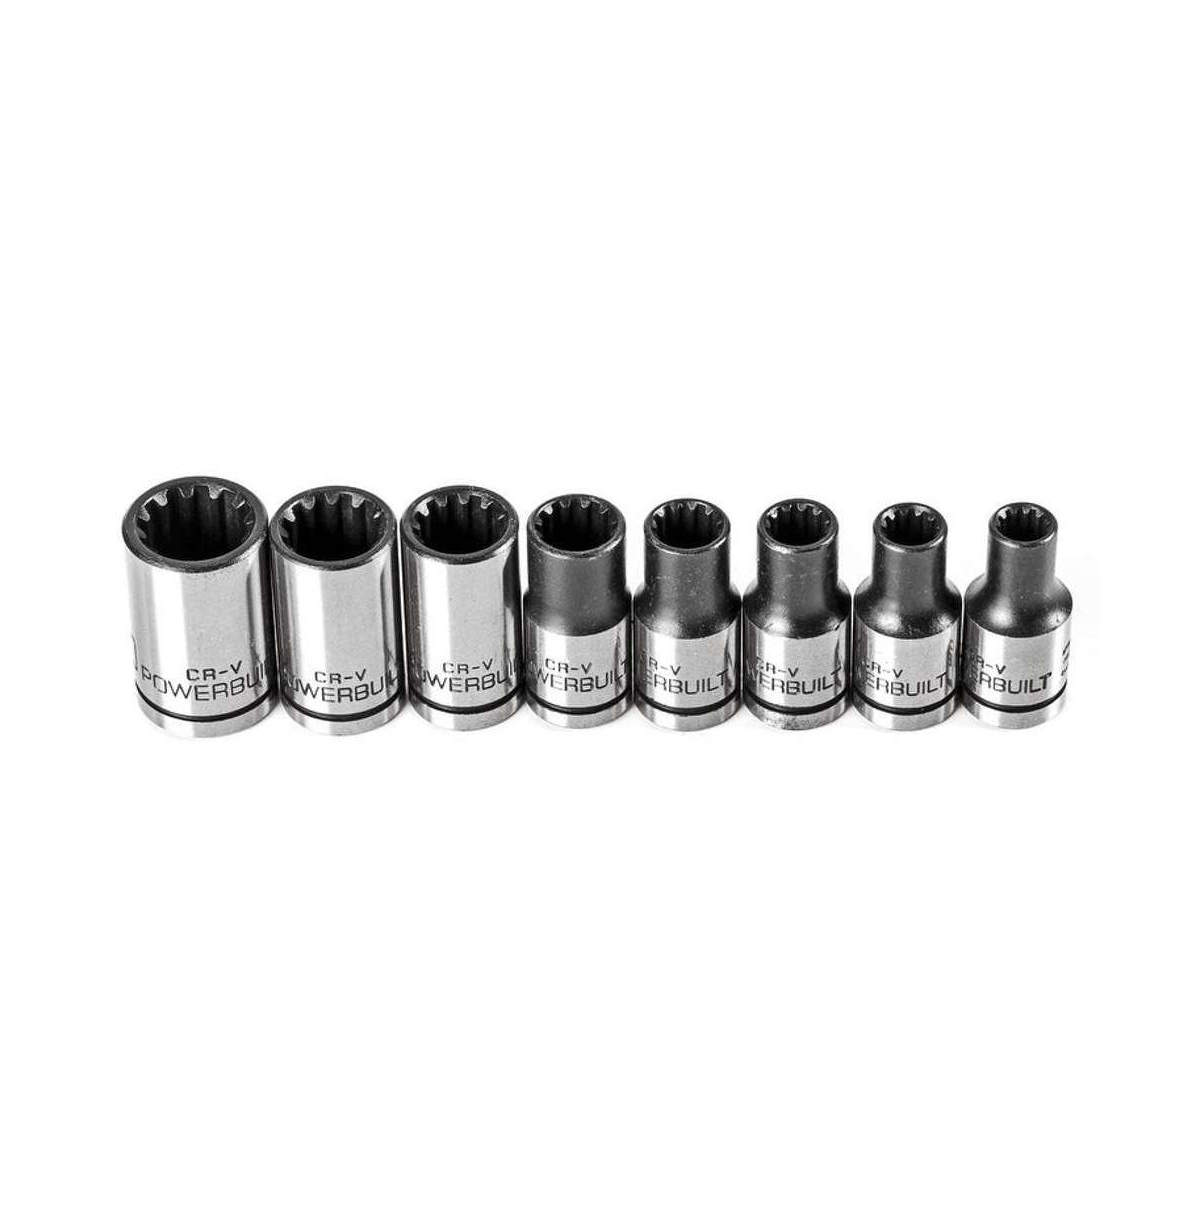 8 Piece 1/4 Inch Drive Universal Socket Set with Tray - Silver